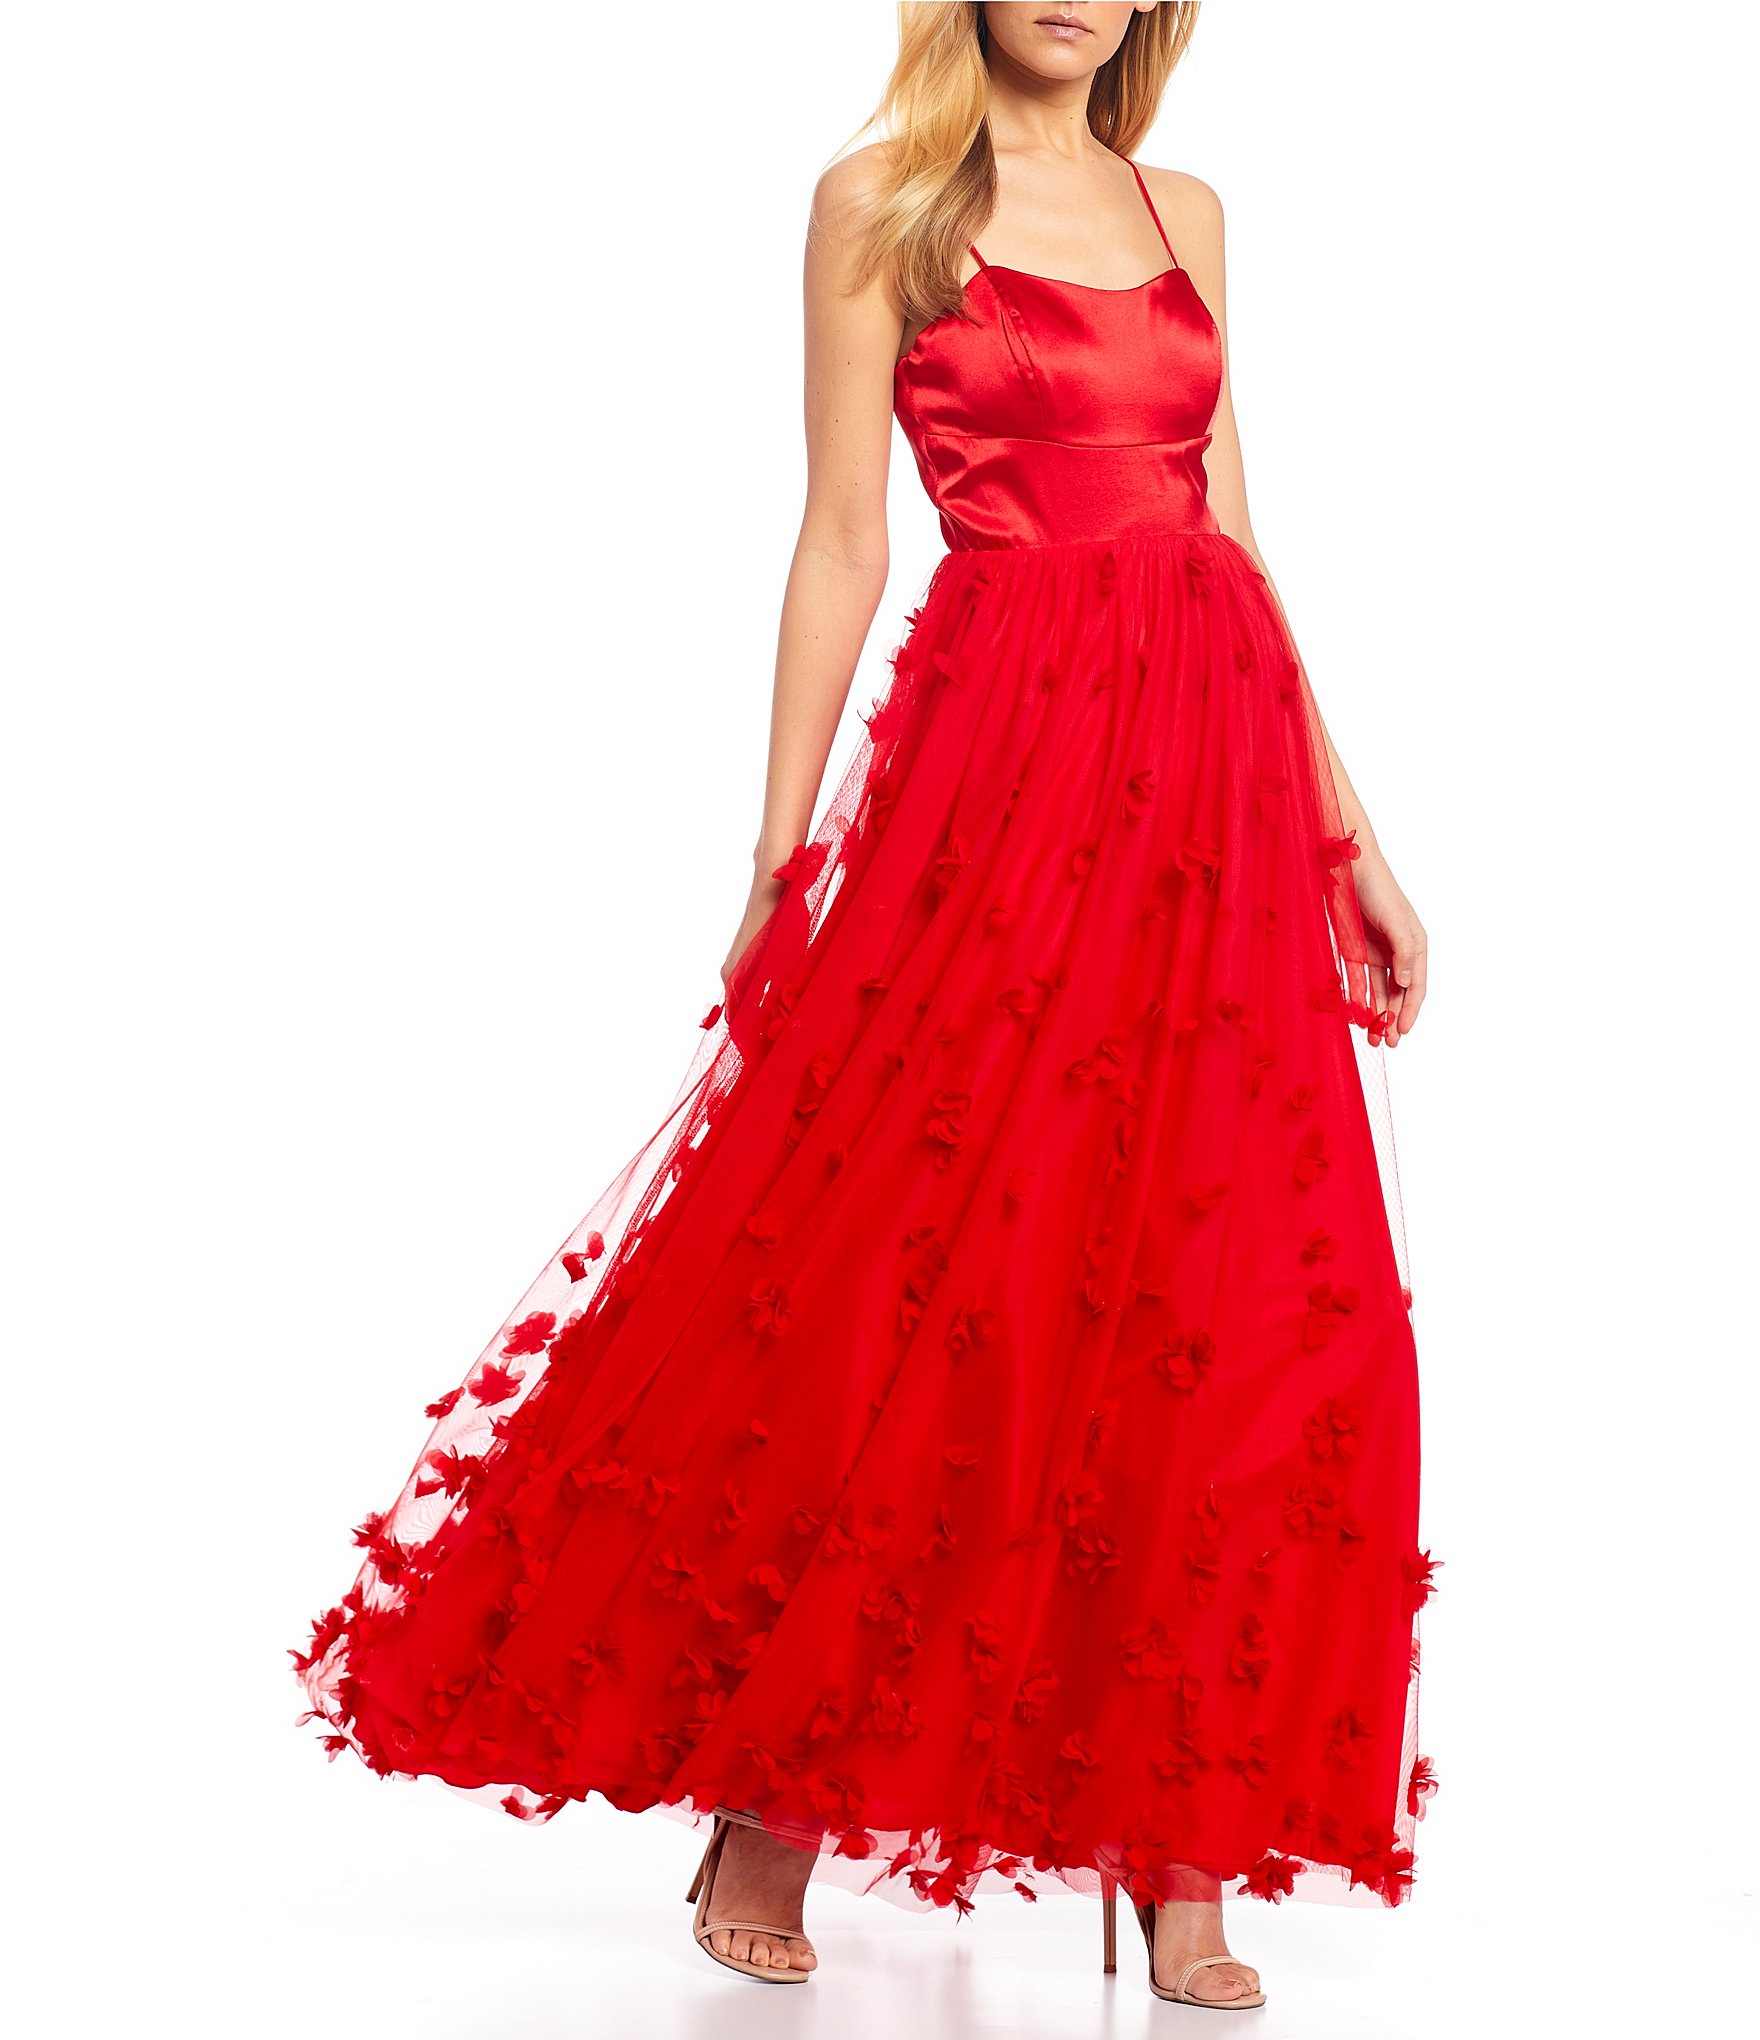 gown style party wear dresses